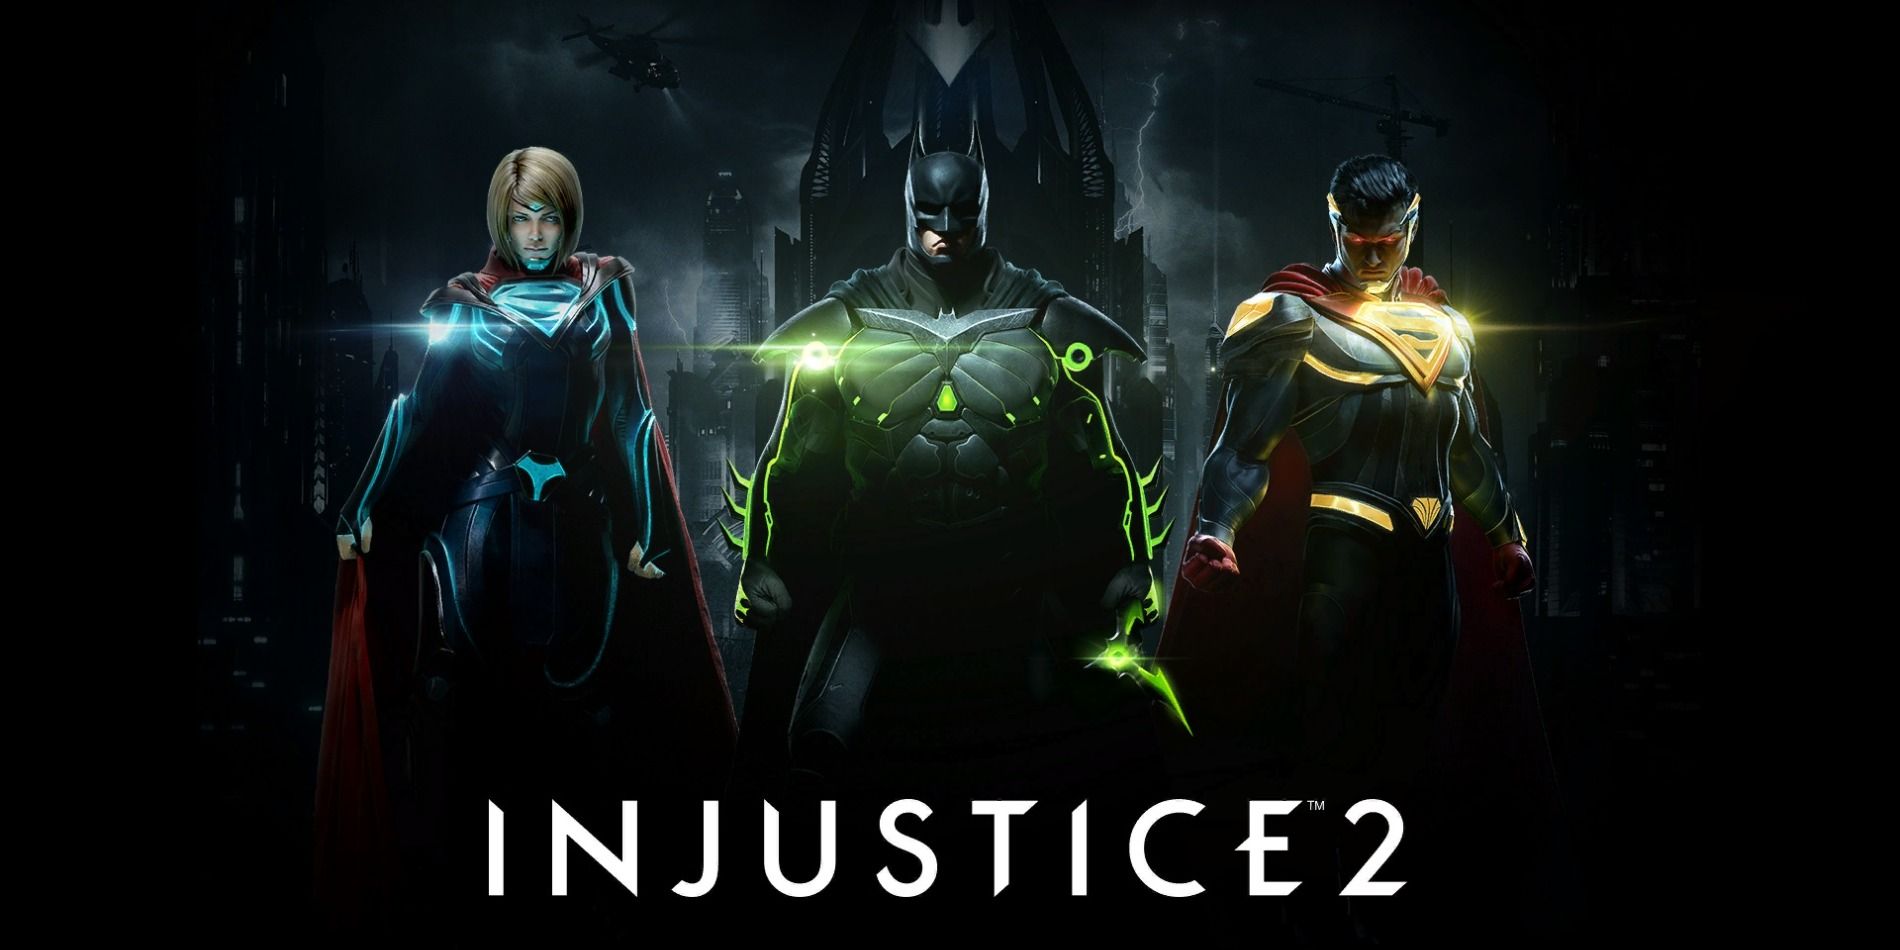 Promo image for Injustice 2 featuring Supergirl, Batman, and Superman